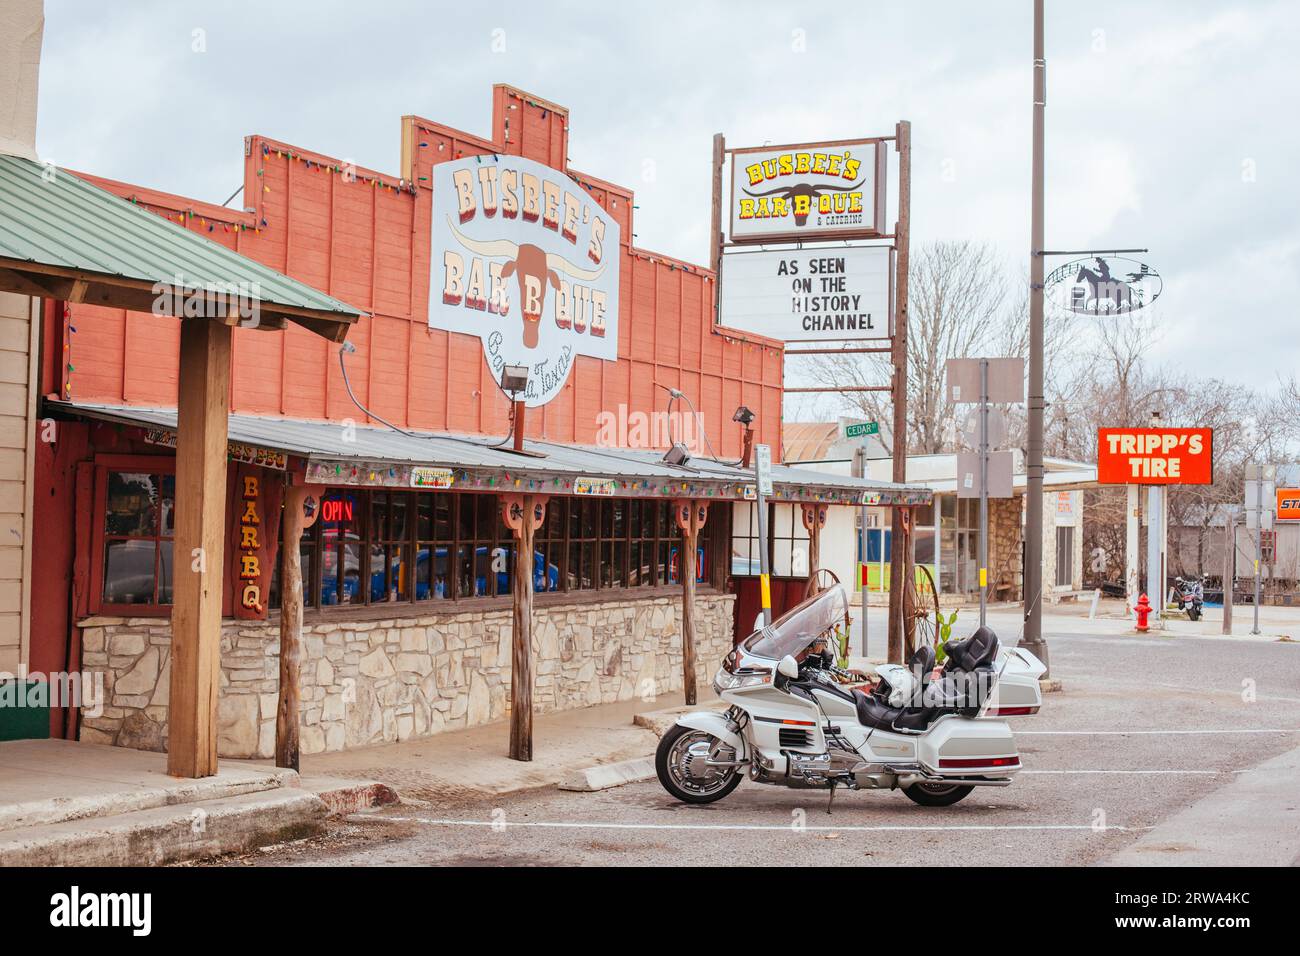 Bandera, USA, January 27 2019: Bandera is a small town in Texas considered the 'Cowboy Capital of the World' Stock Photo